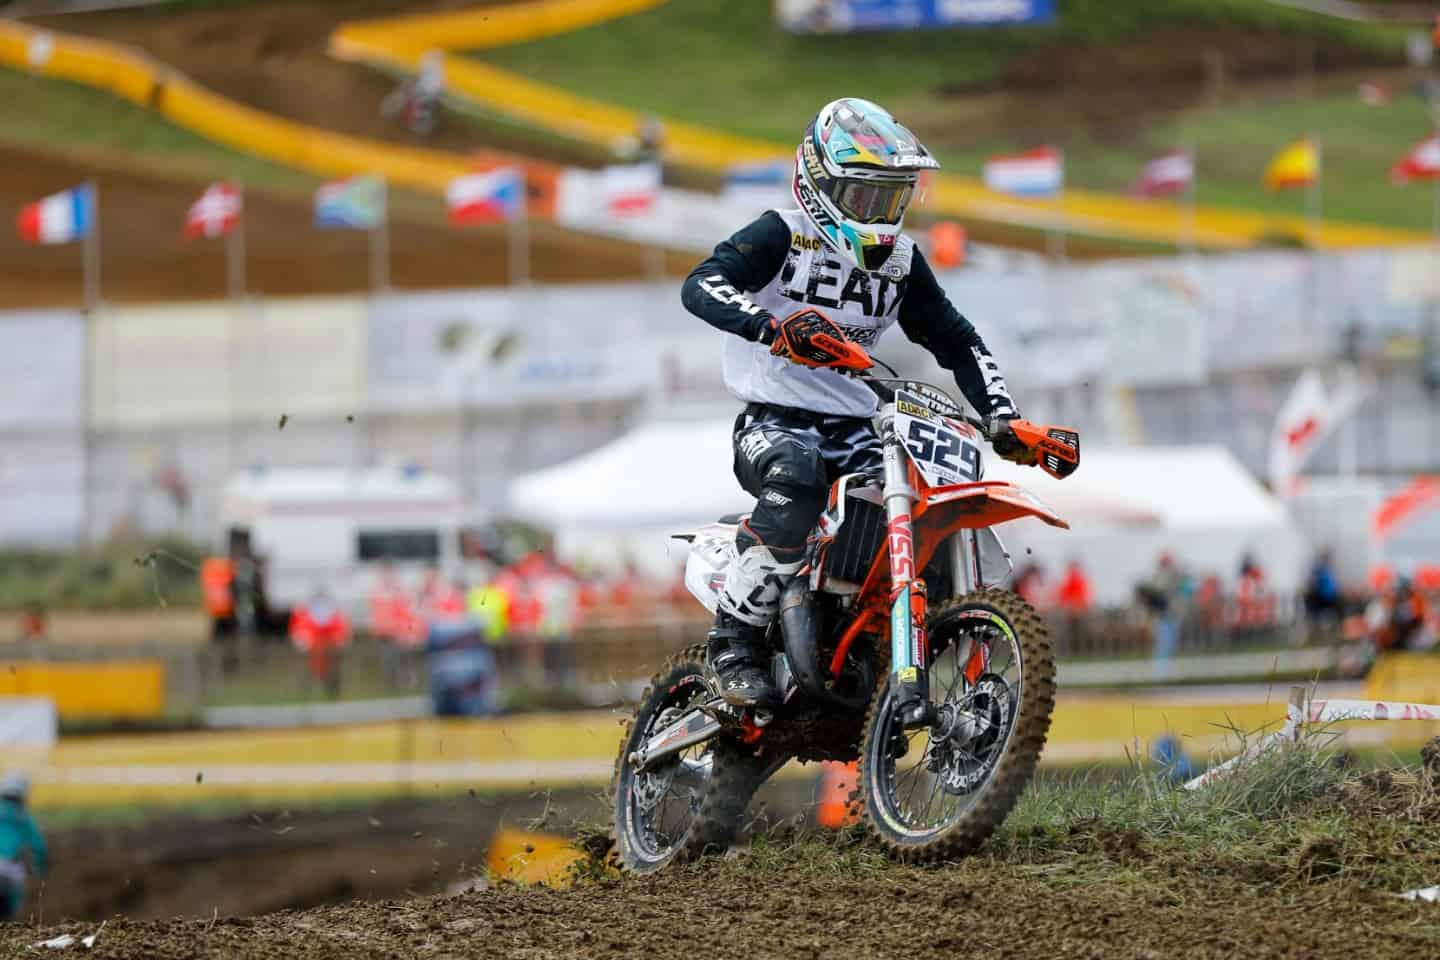 PM Becker Racing - ADAC MX Masters in Holzgerlingen